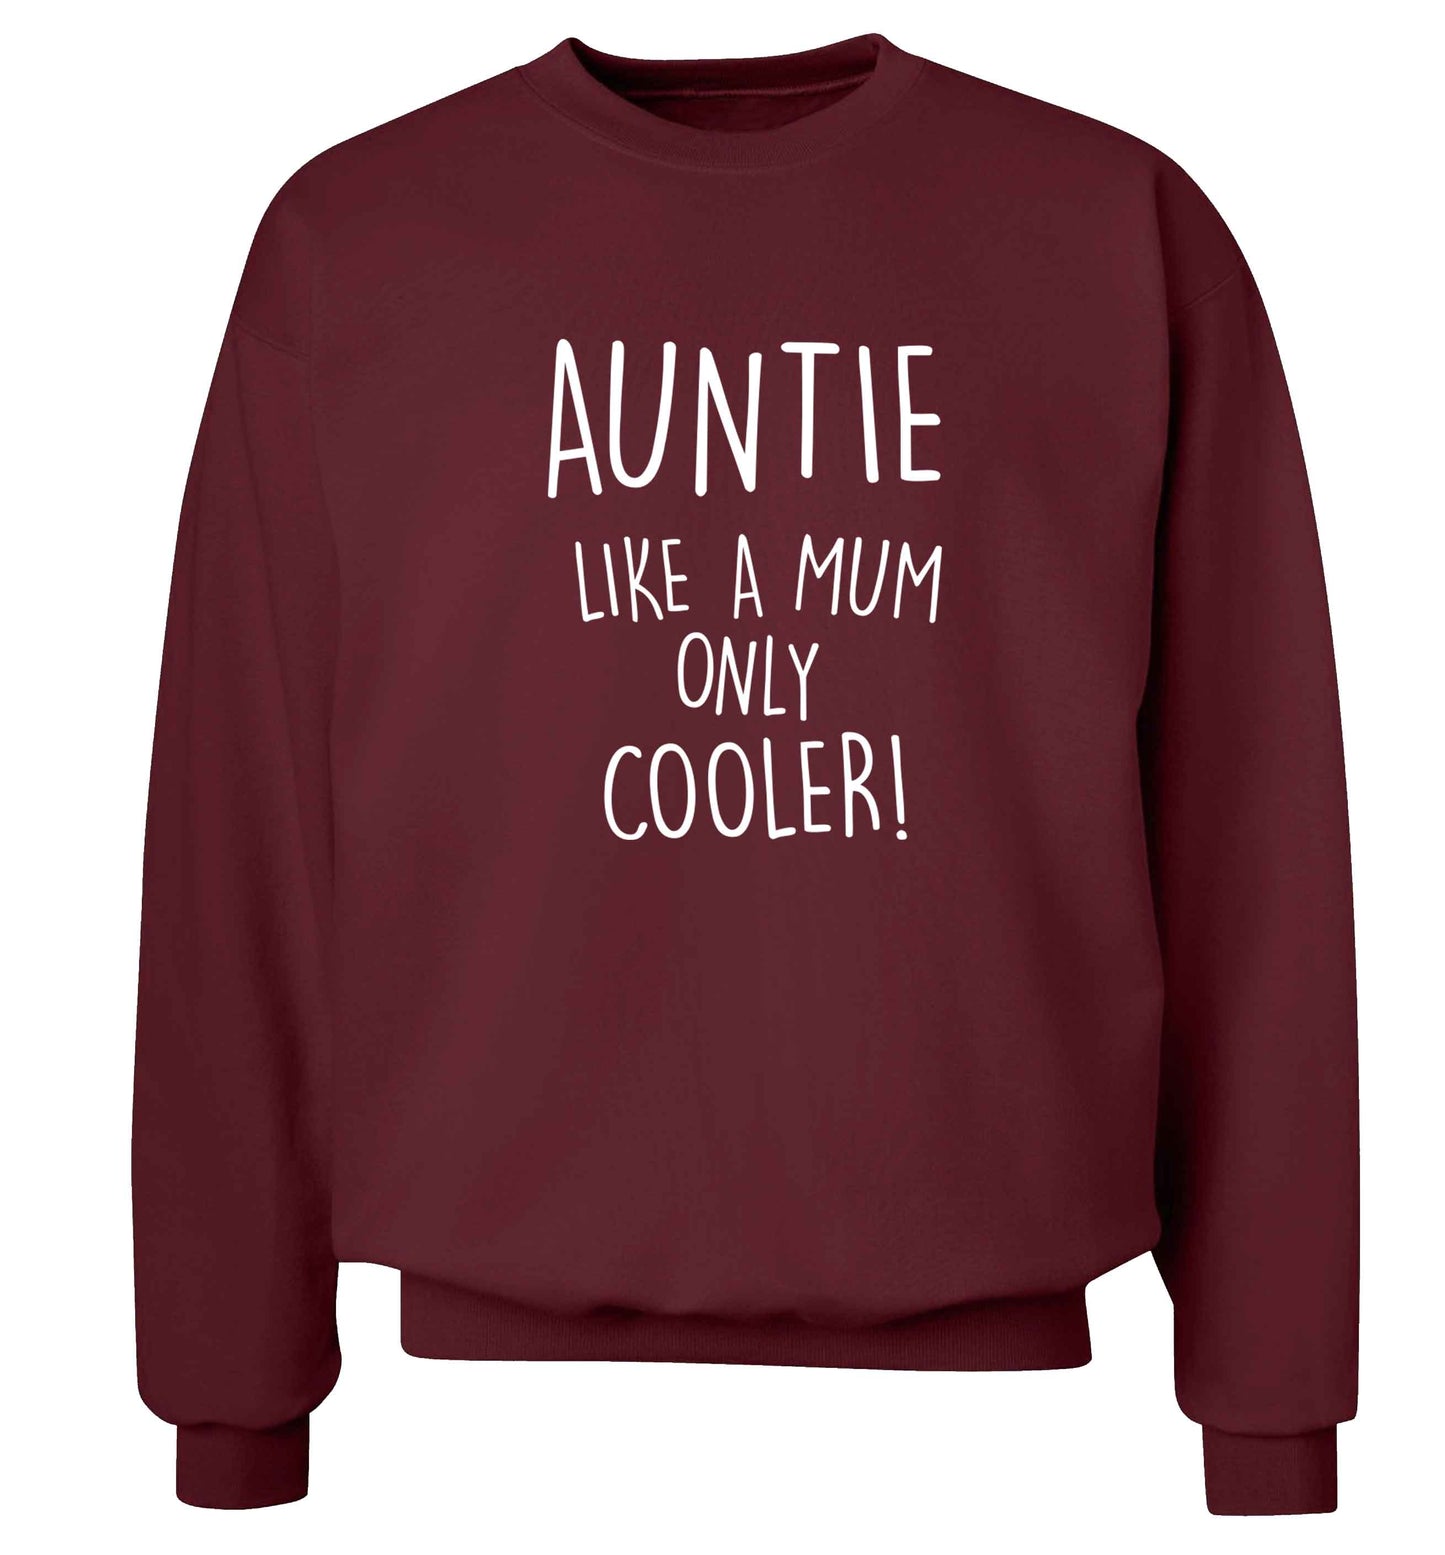 Auntie like a mum only cooler adult's unisex maroon sweater 2XL